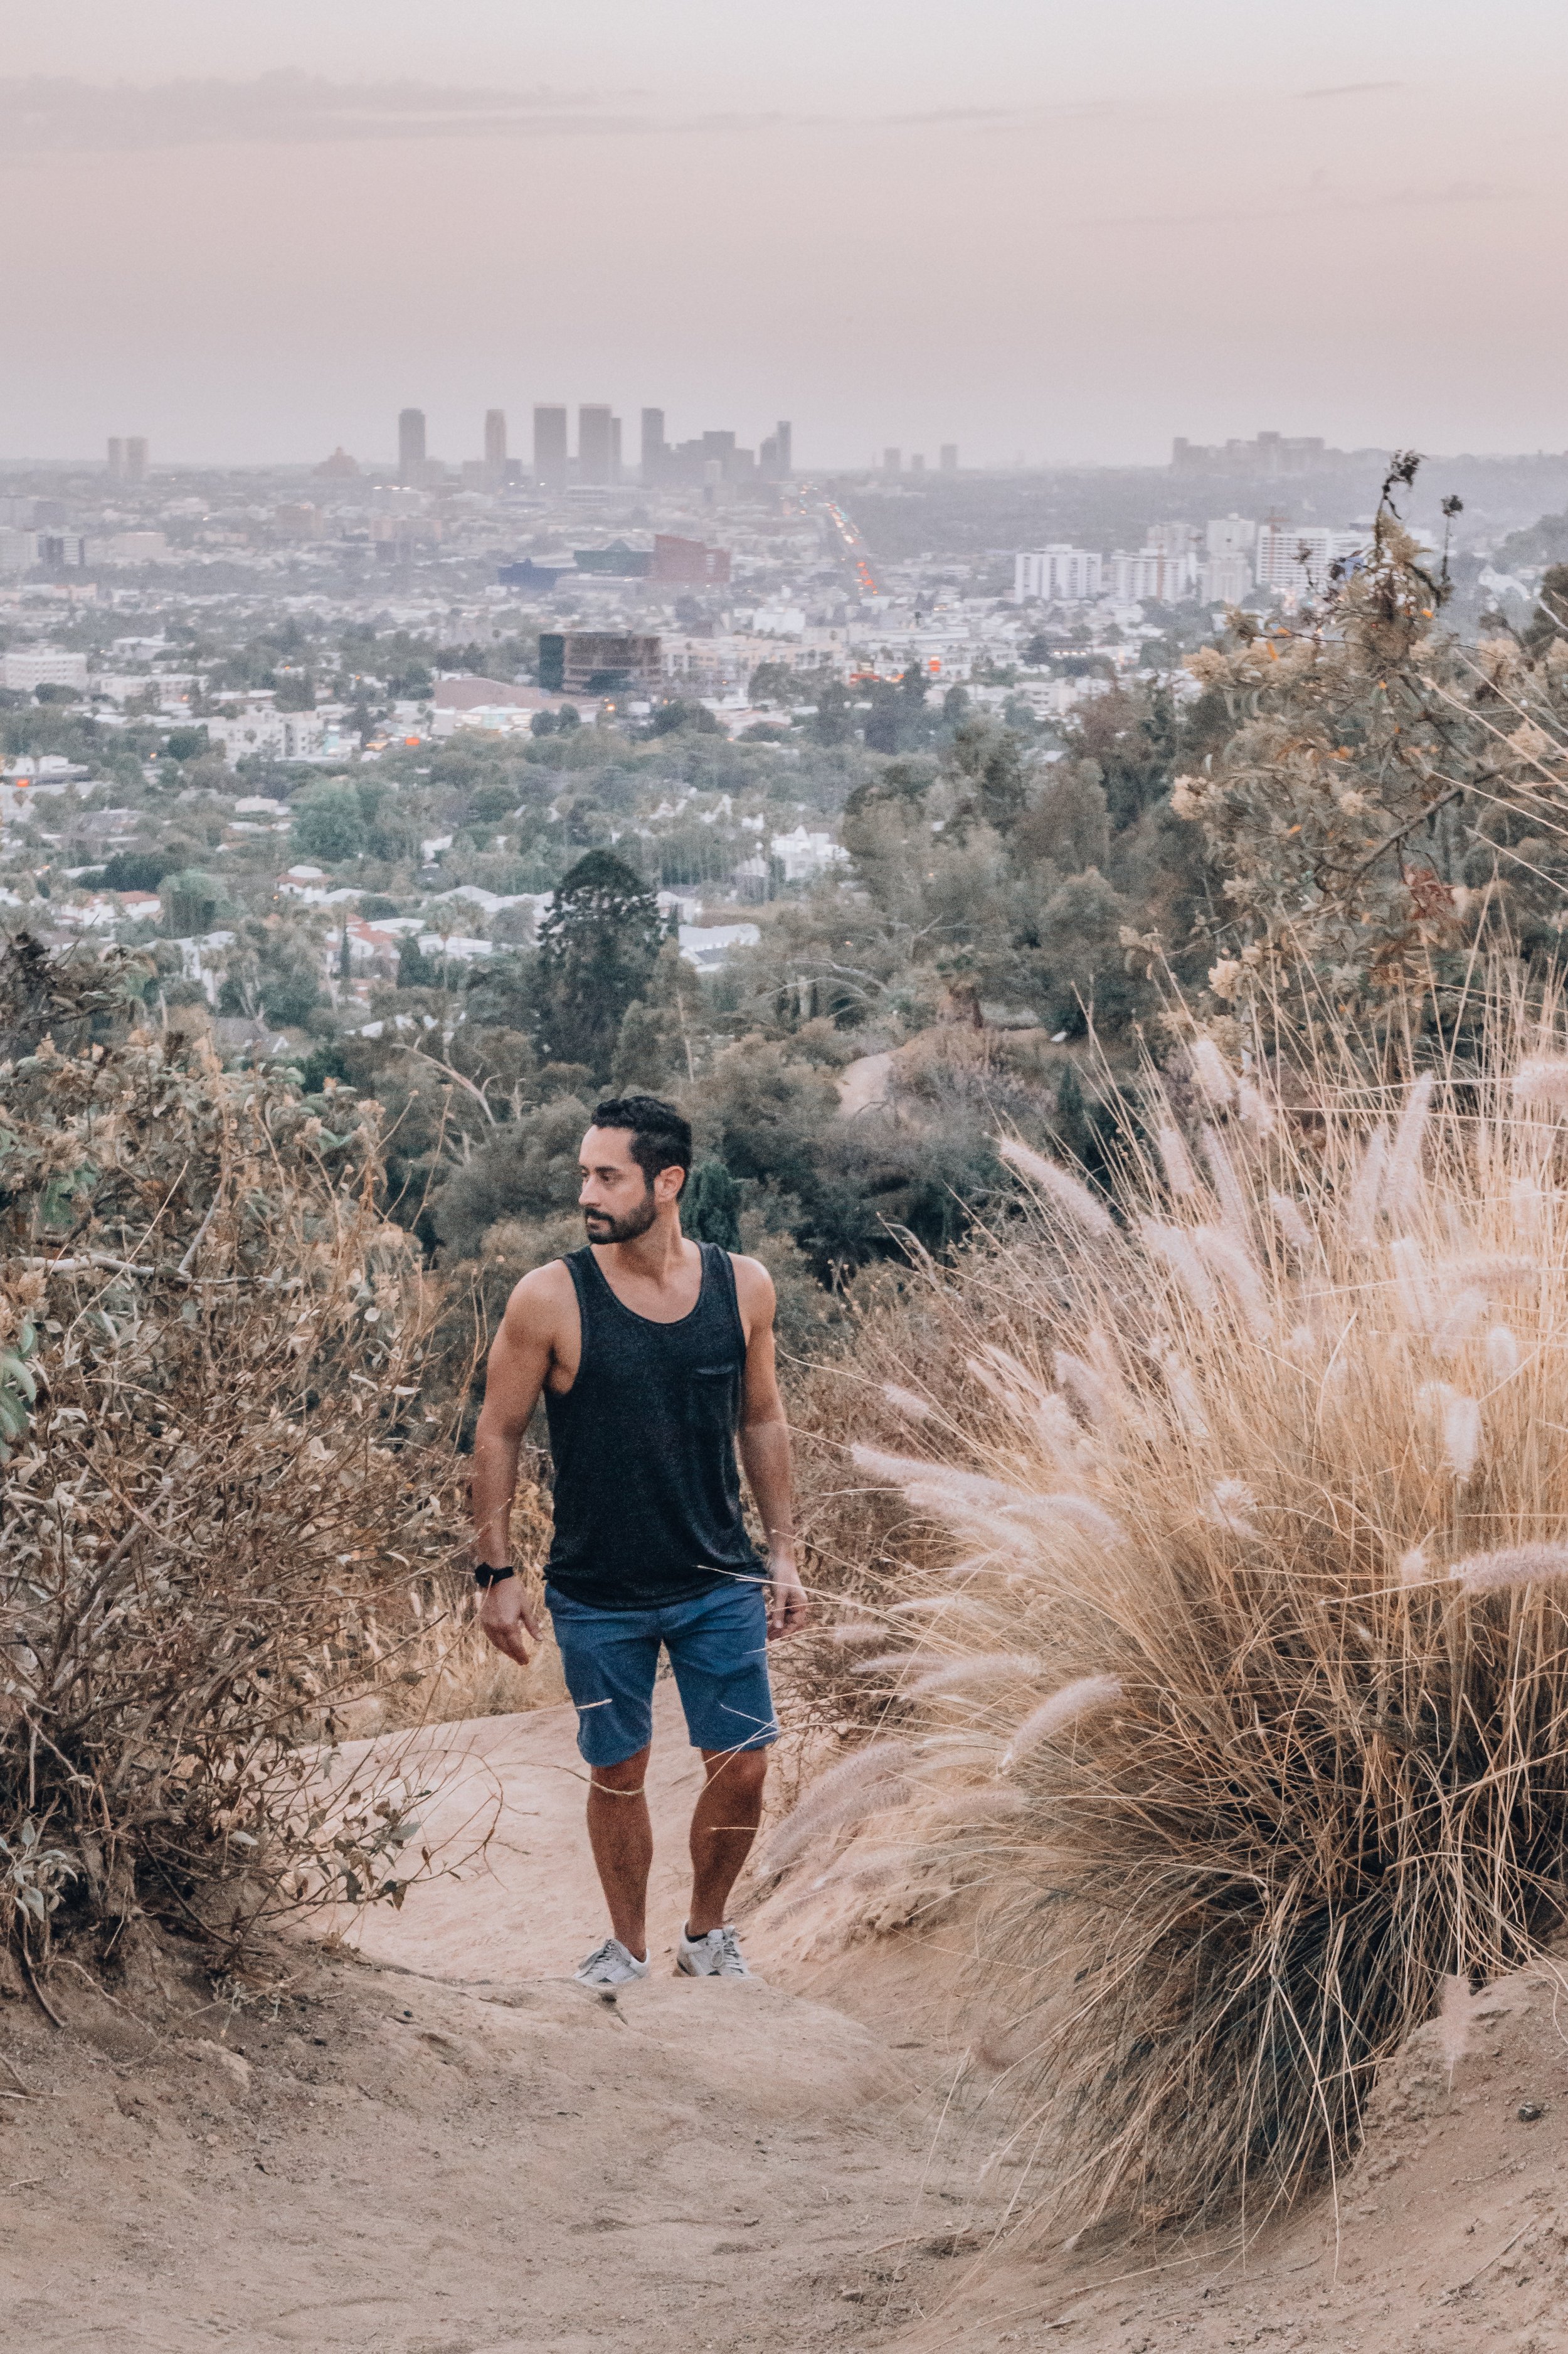 Runyon Canyon is a beautiful park in the heart of L.A. Go for a morning or sunset hike! 